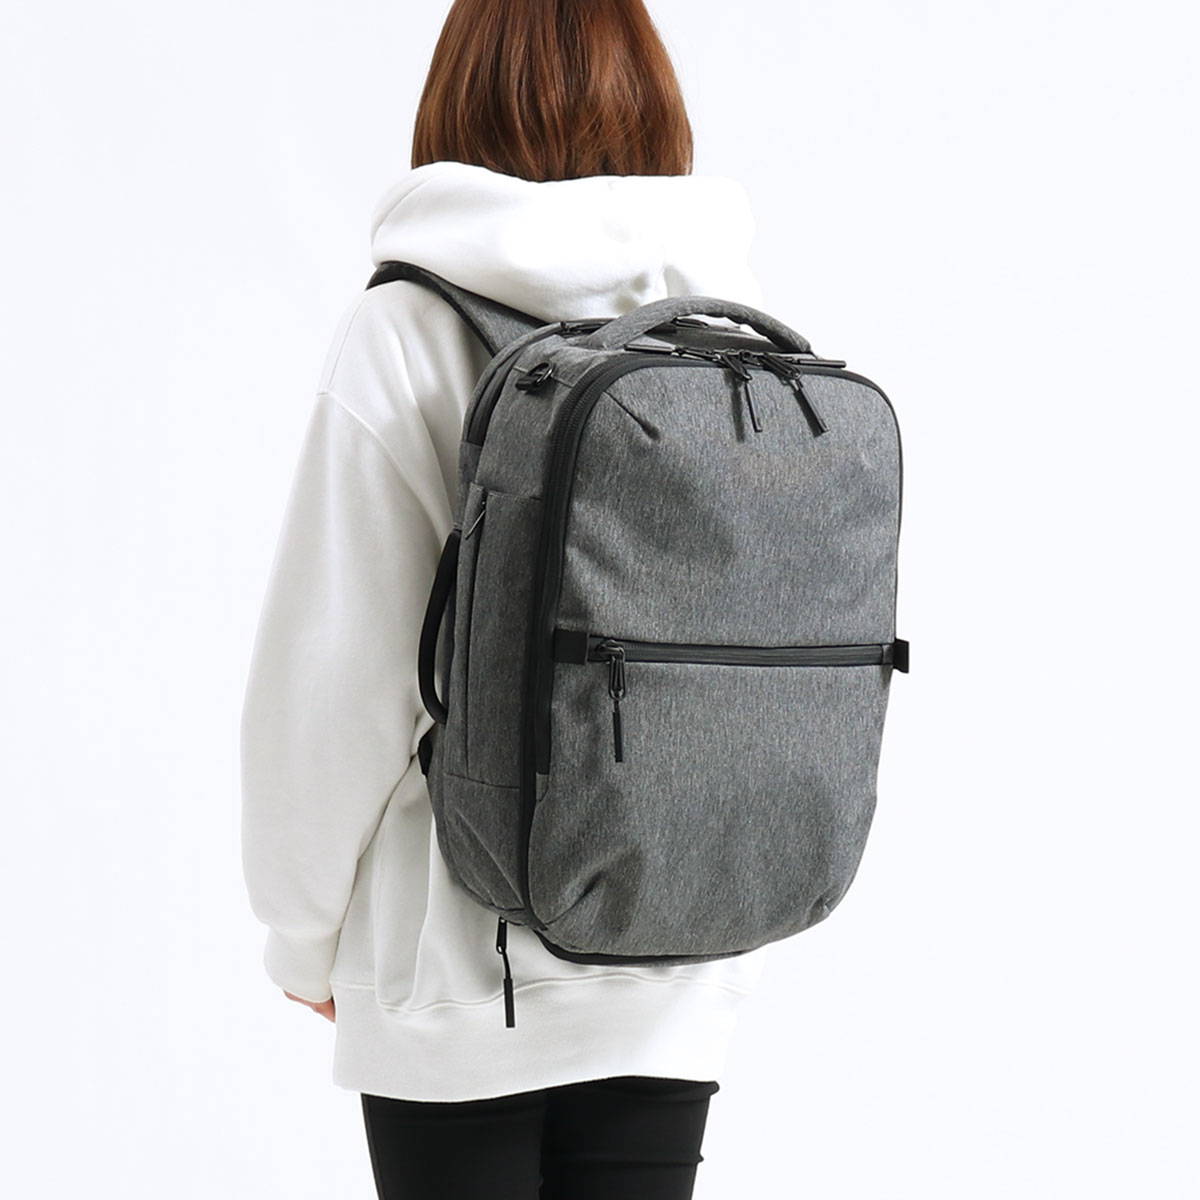 AER travel pack2 small 正規品